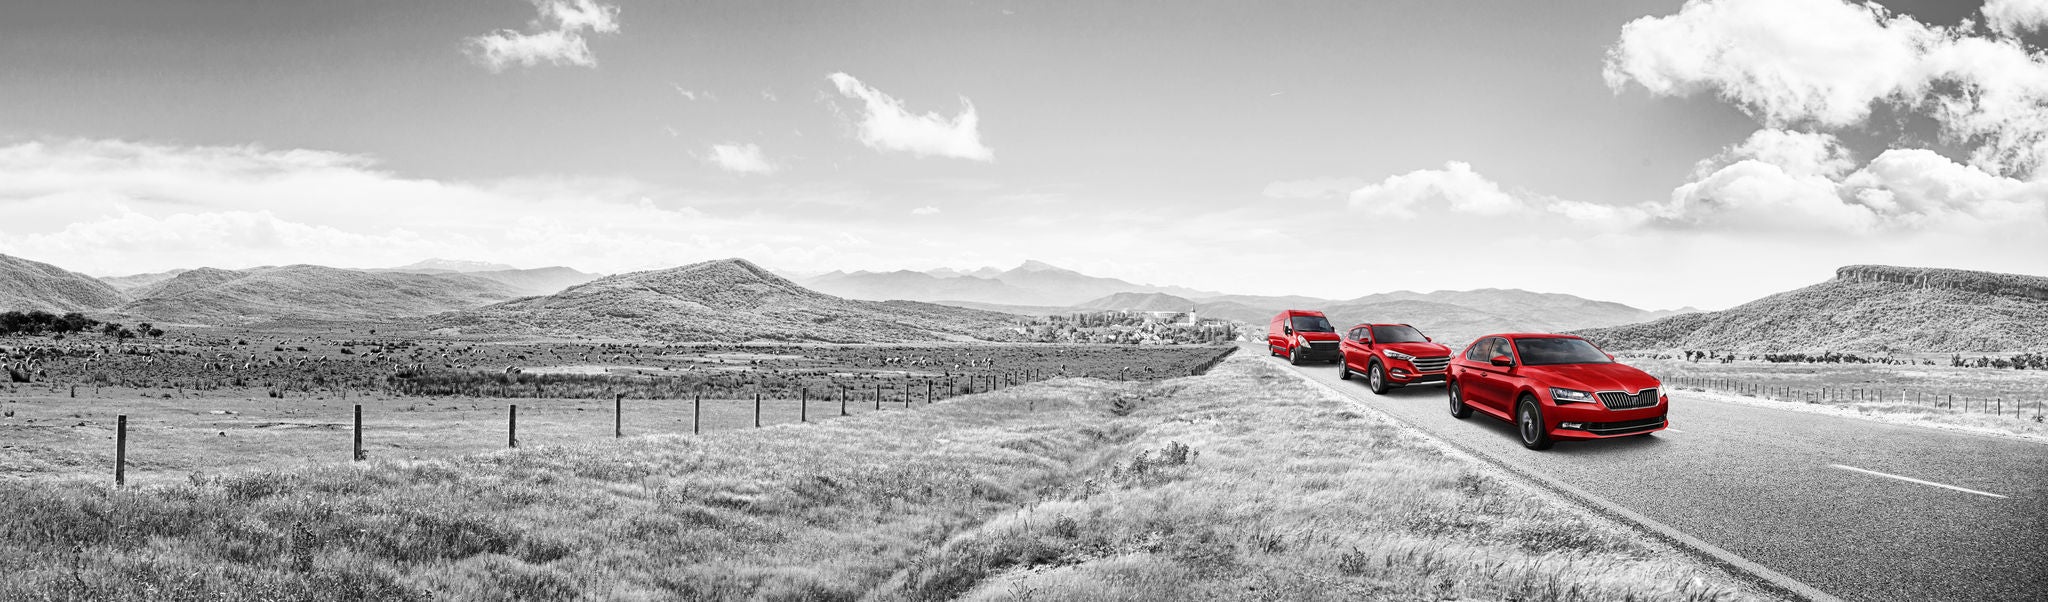 Matador 2018 Visual 3-Cars - Red Cars on road with Village and Hills in Backround